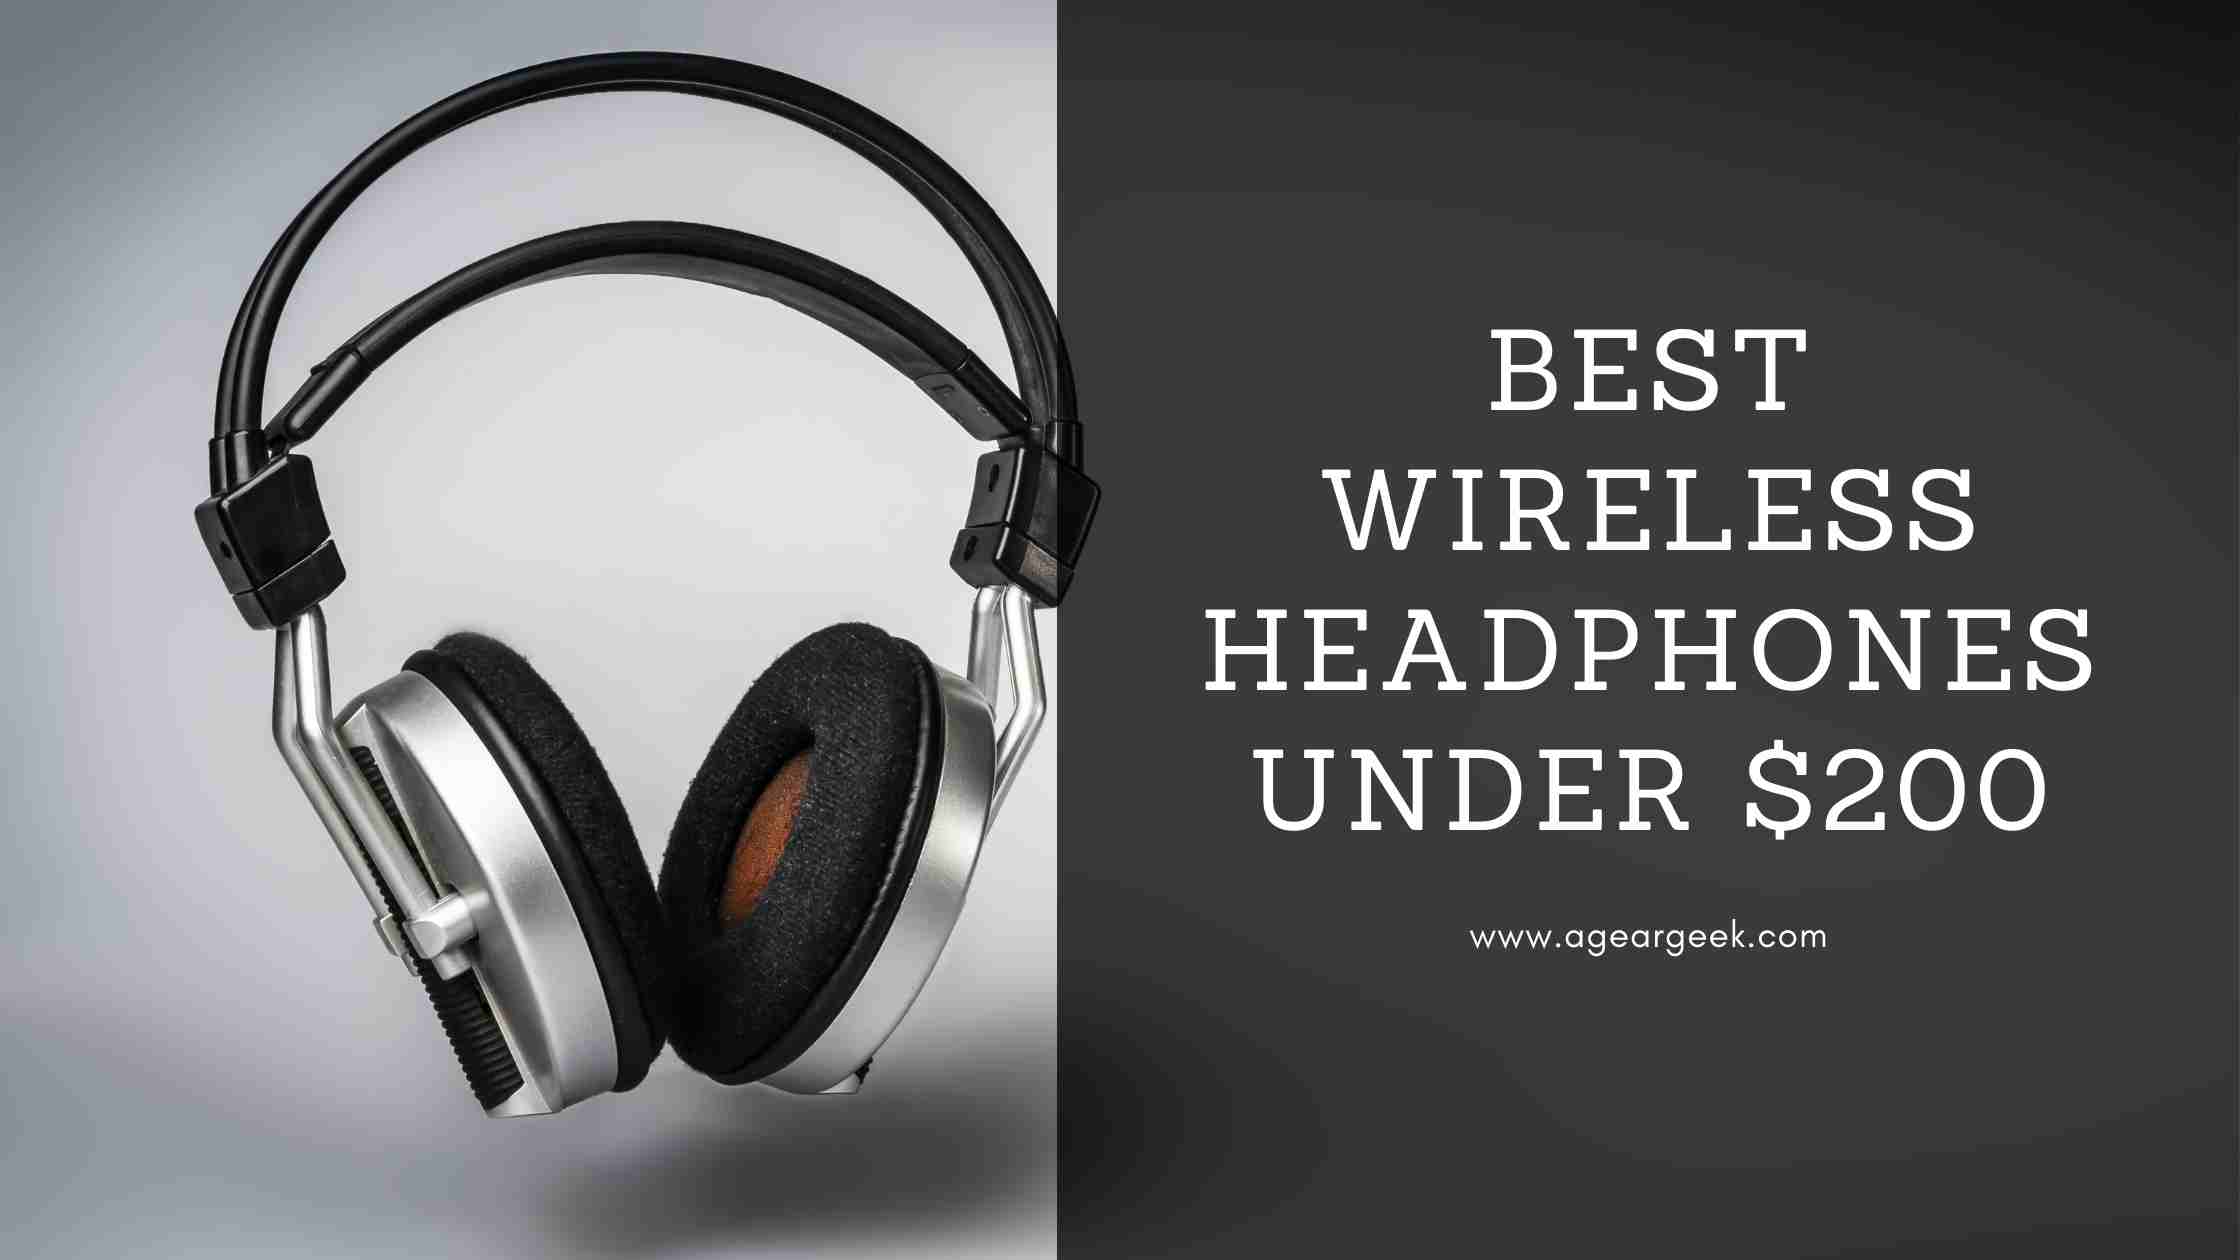 You are currently viewing Best Wireless Headphones under $200